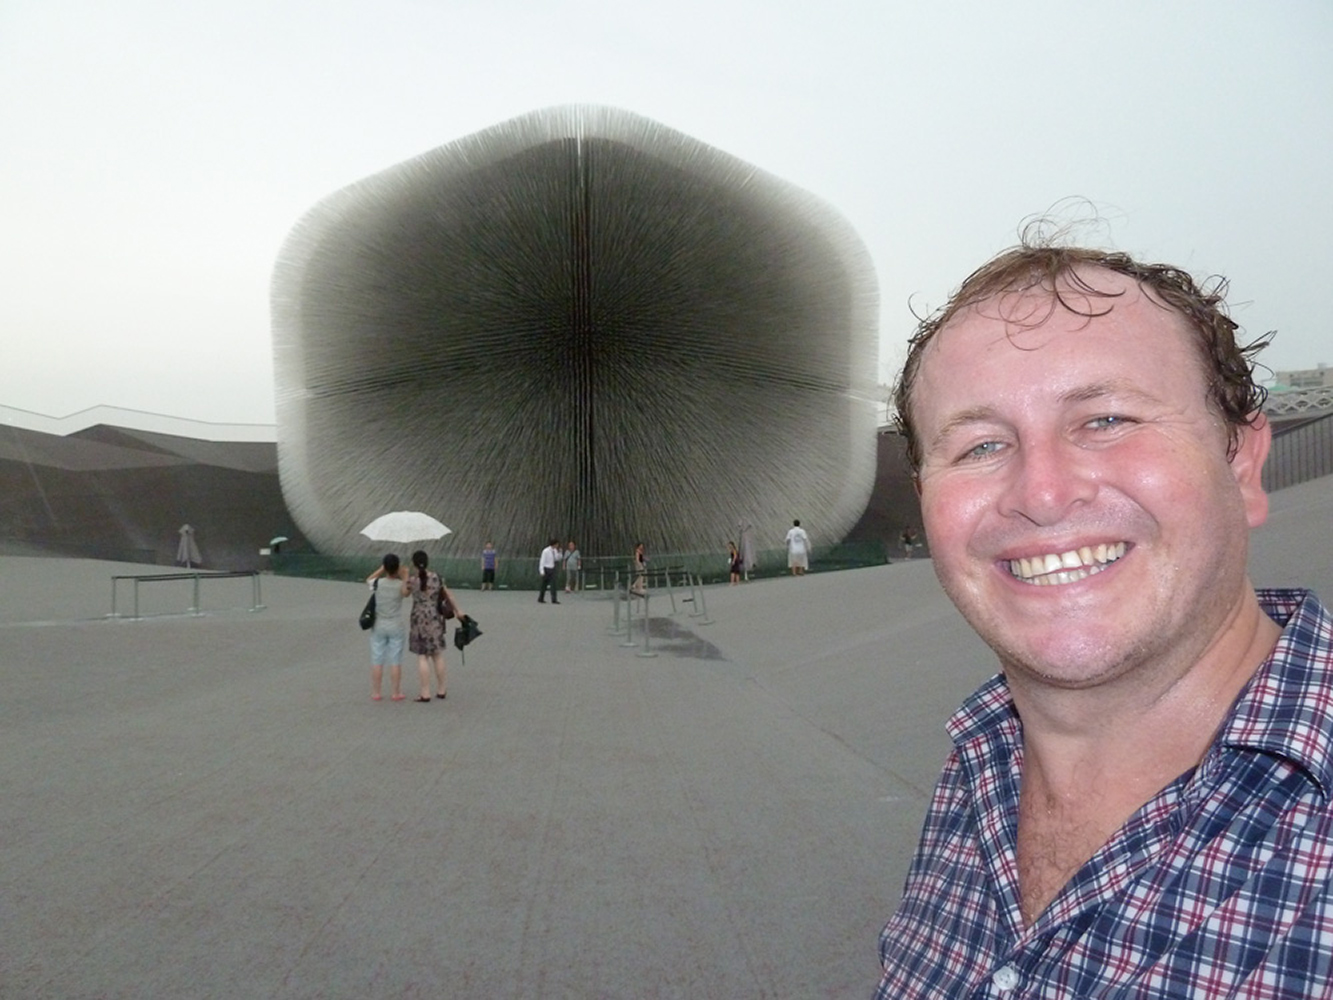 Shanghai, China. The British seed cathedral at the wet 2010 Shanghai World Expo